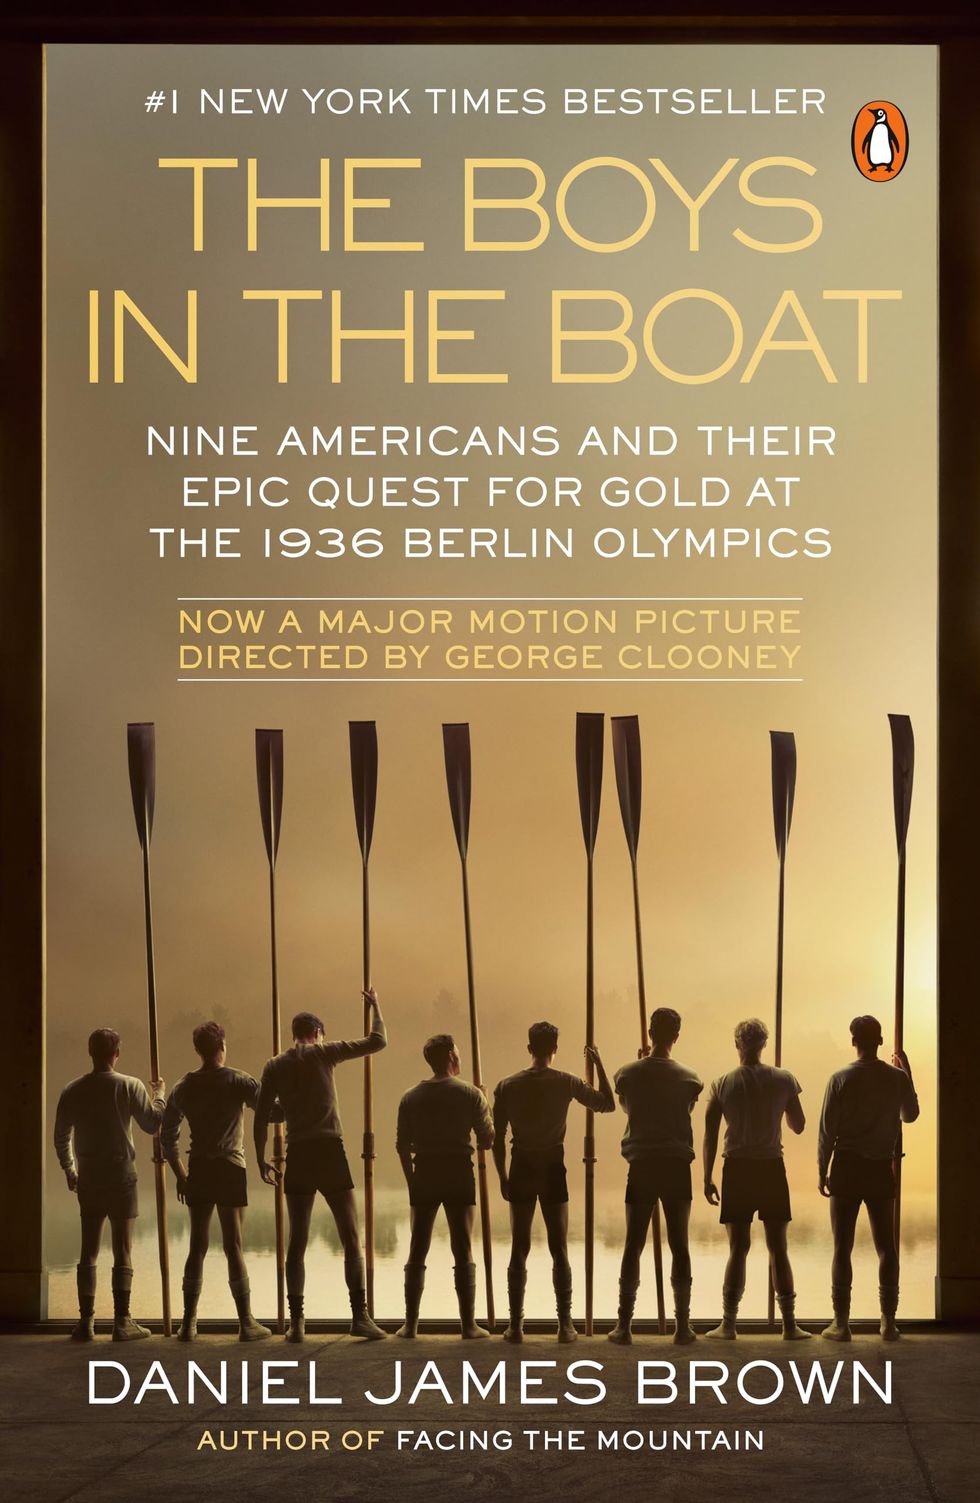 The Incredible True Story Behind 'The Boys in the Boat